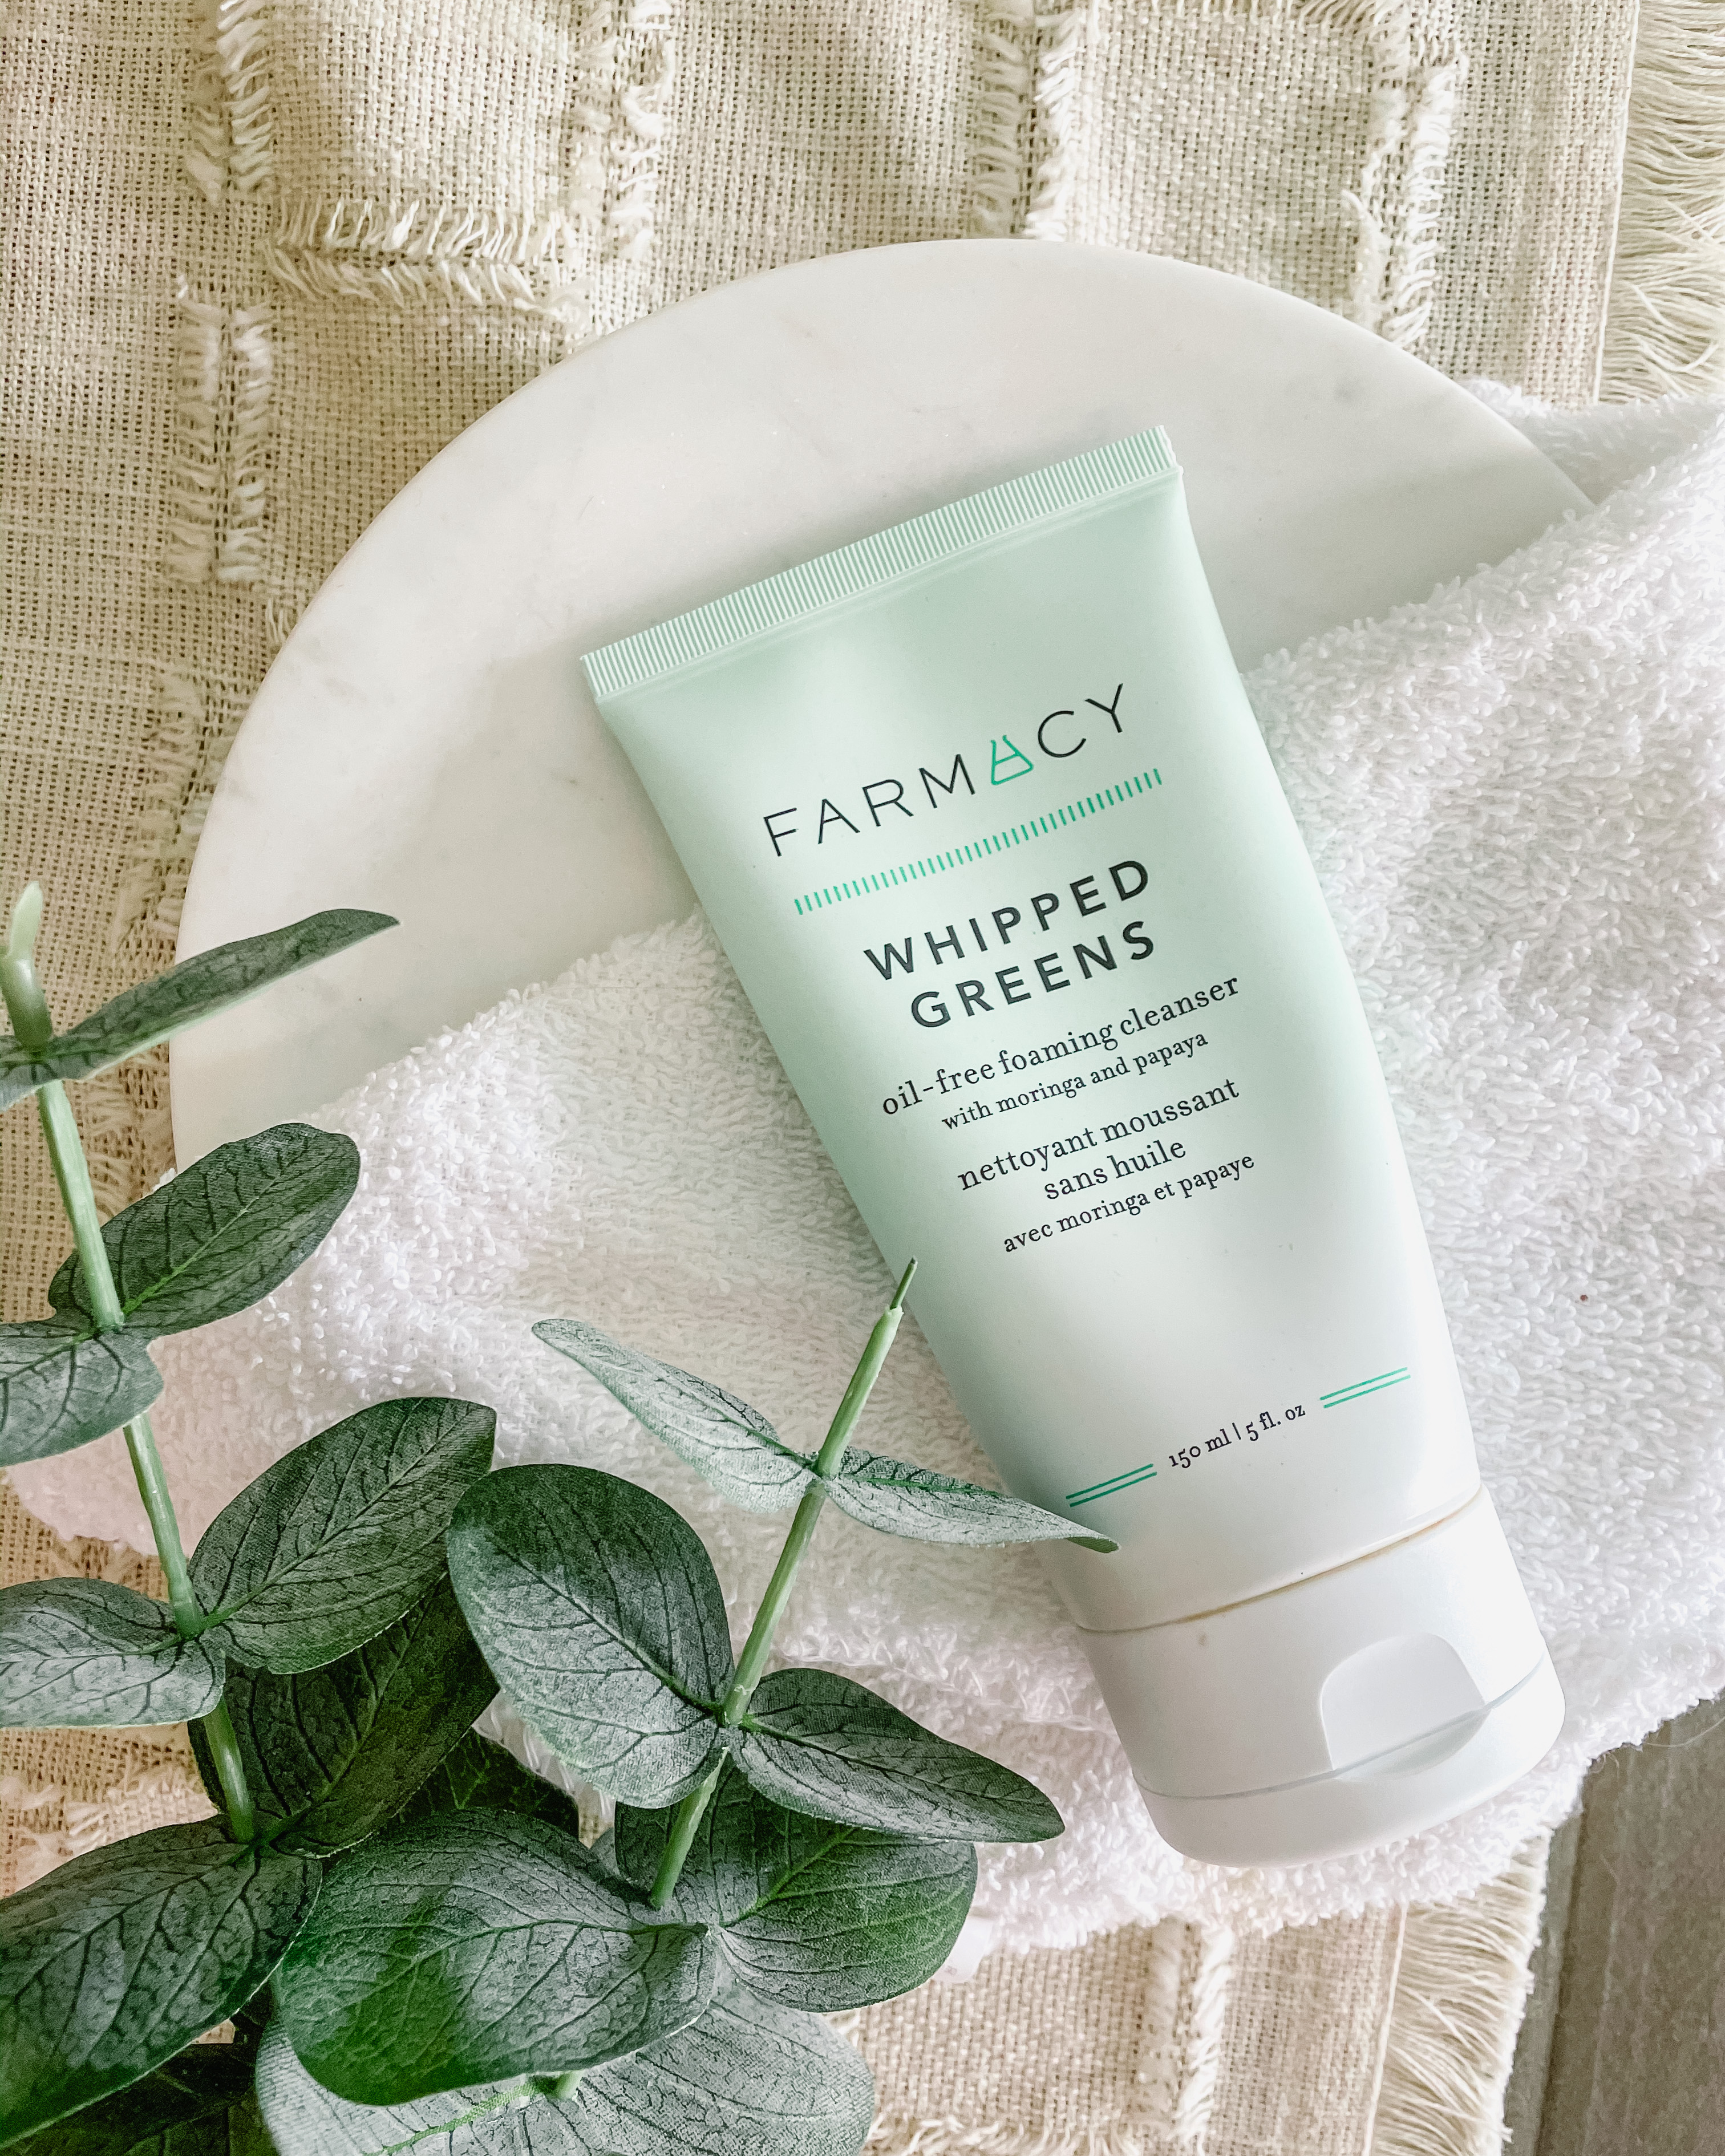 Farmacy Whipped Greens: oil-free foaming cleanser with moringa and papaya | Farmacy Beauty Routine